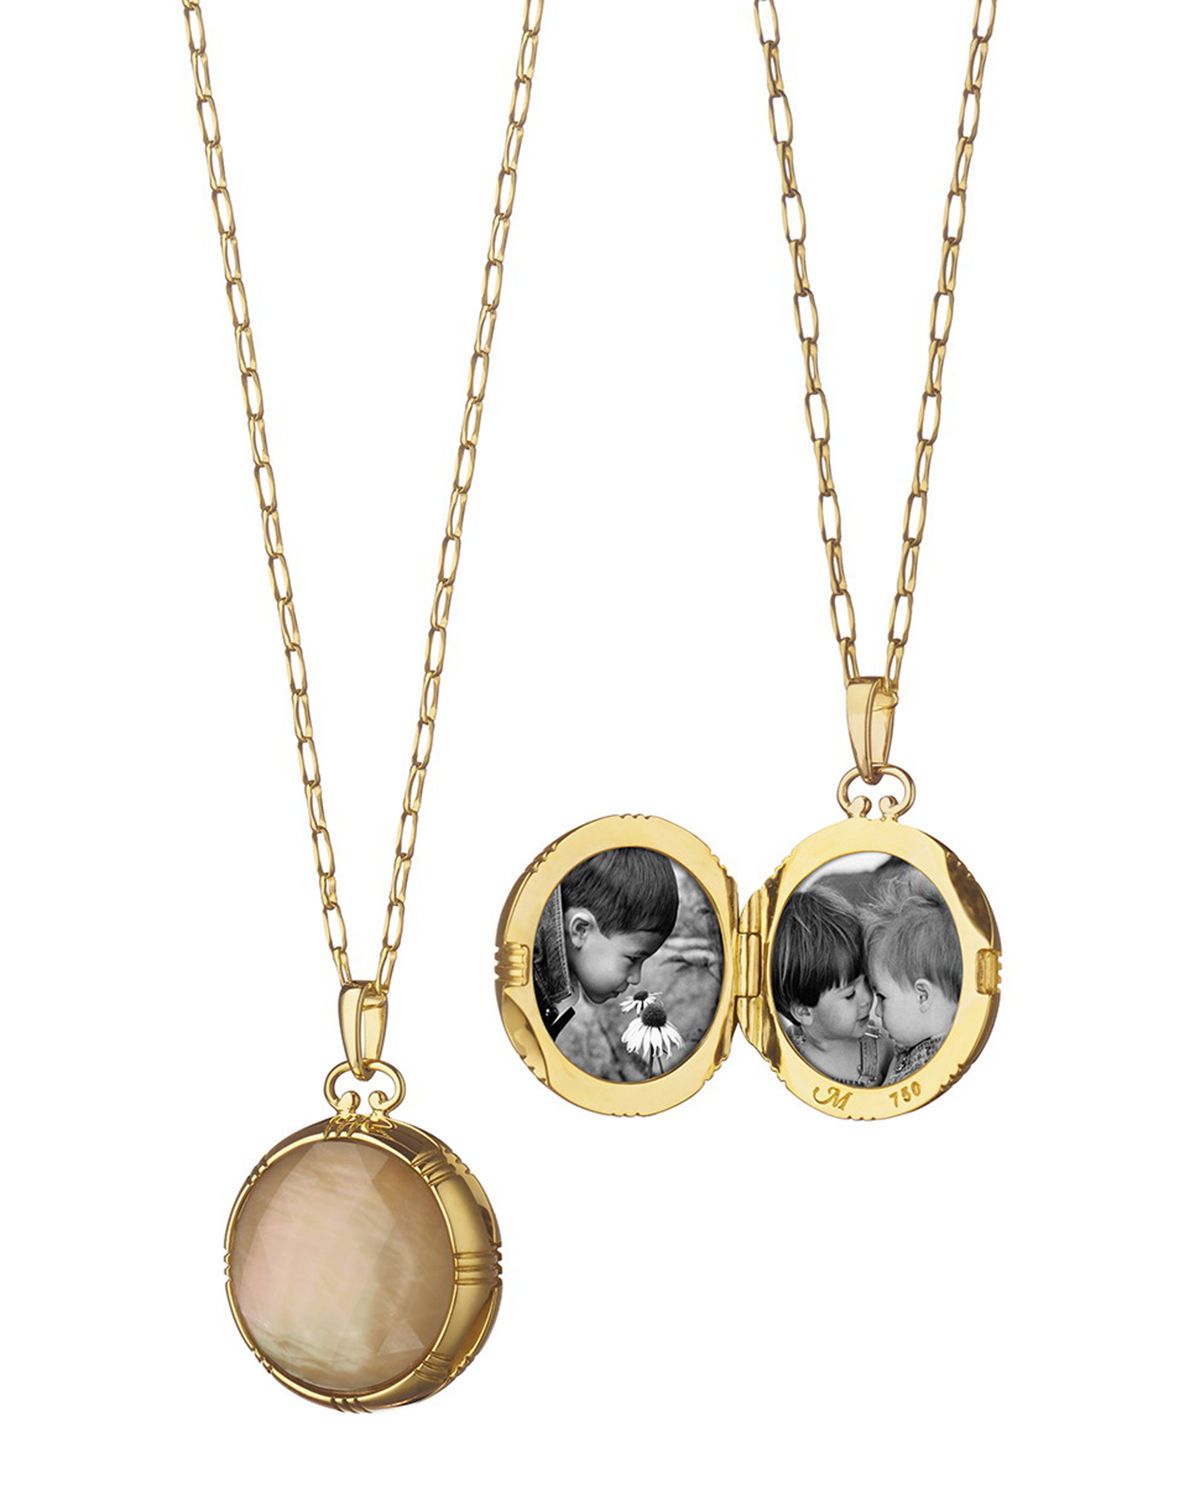 Gold Rock Crystal Mother-of-Pearl Petite Locket Necklace